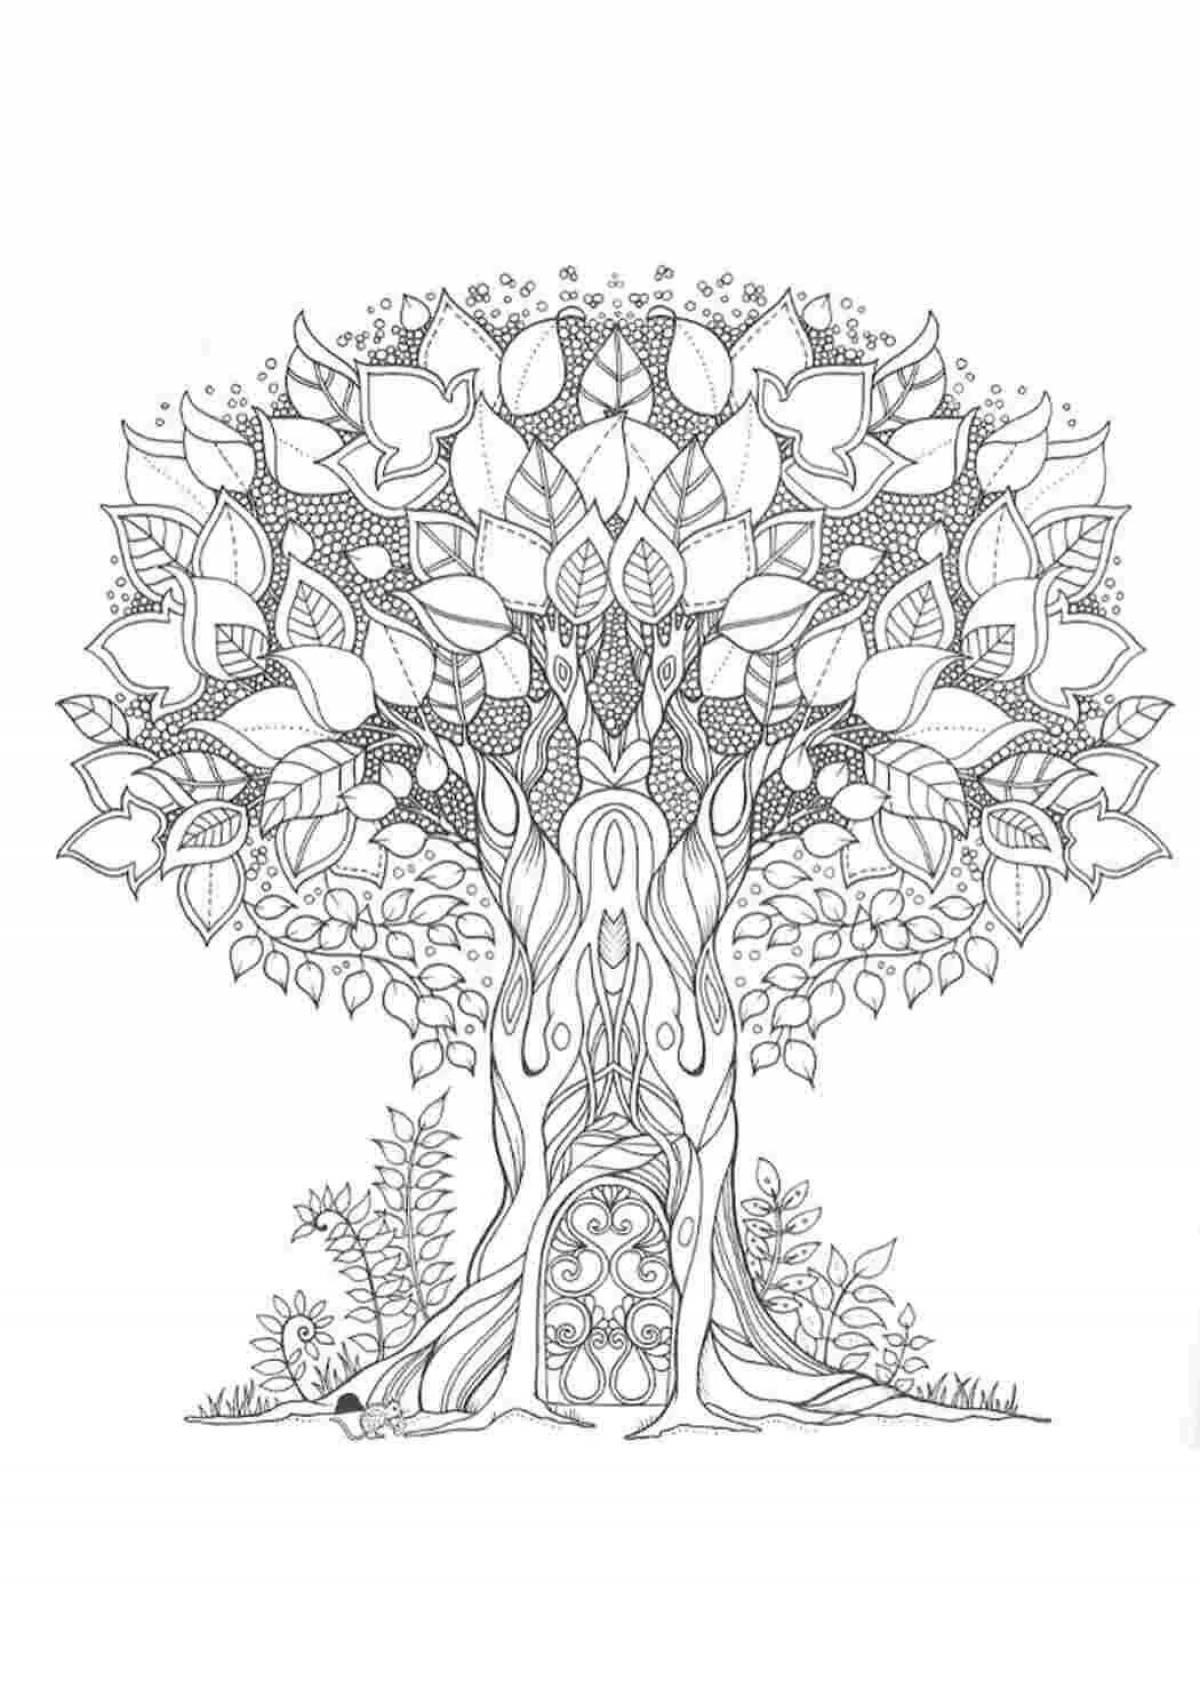 Inspiring anti-stress forest coloring book